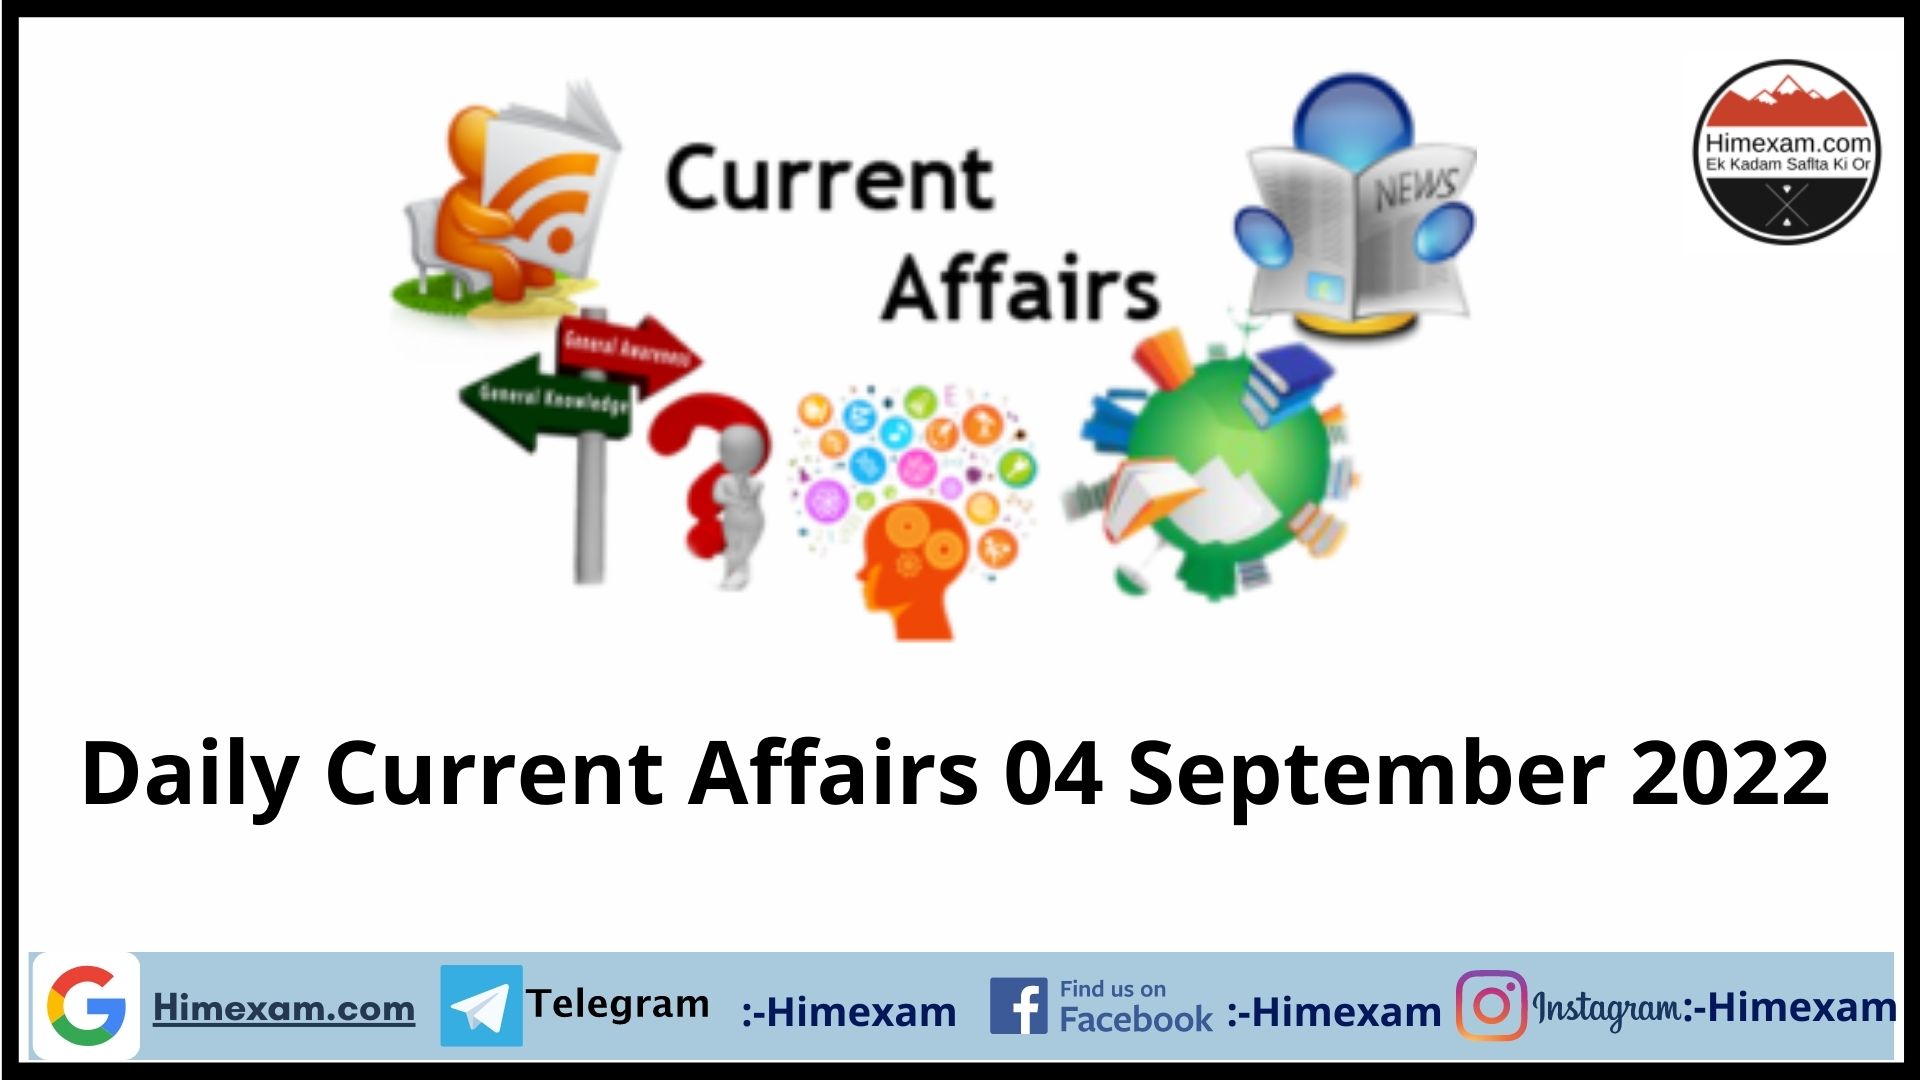 Daily Current Affairs 04 September 2022